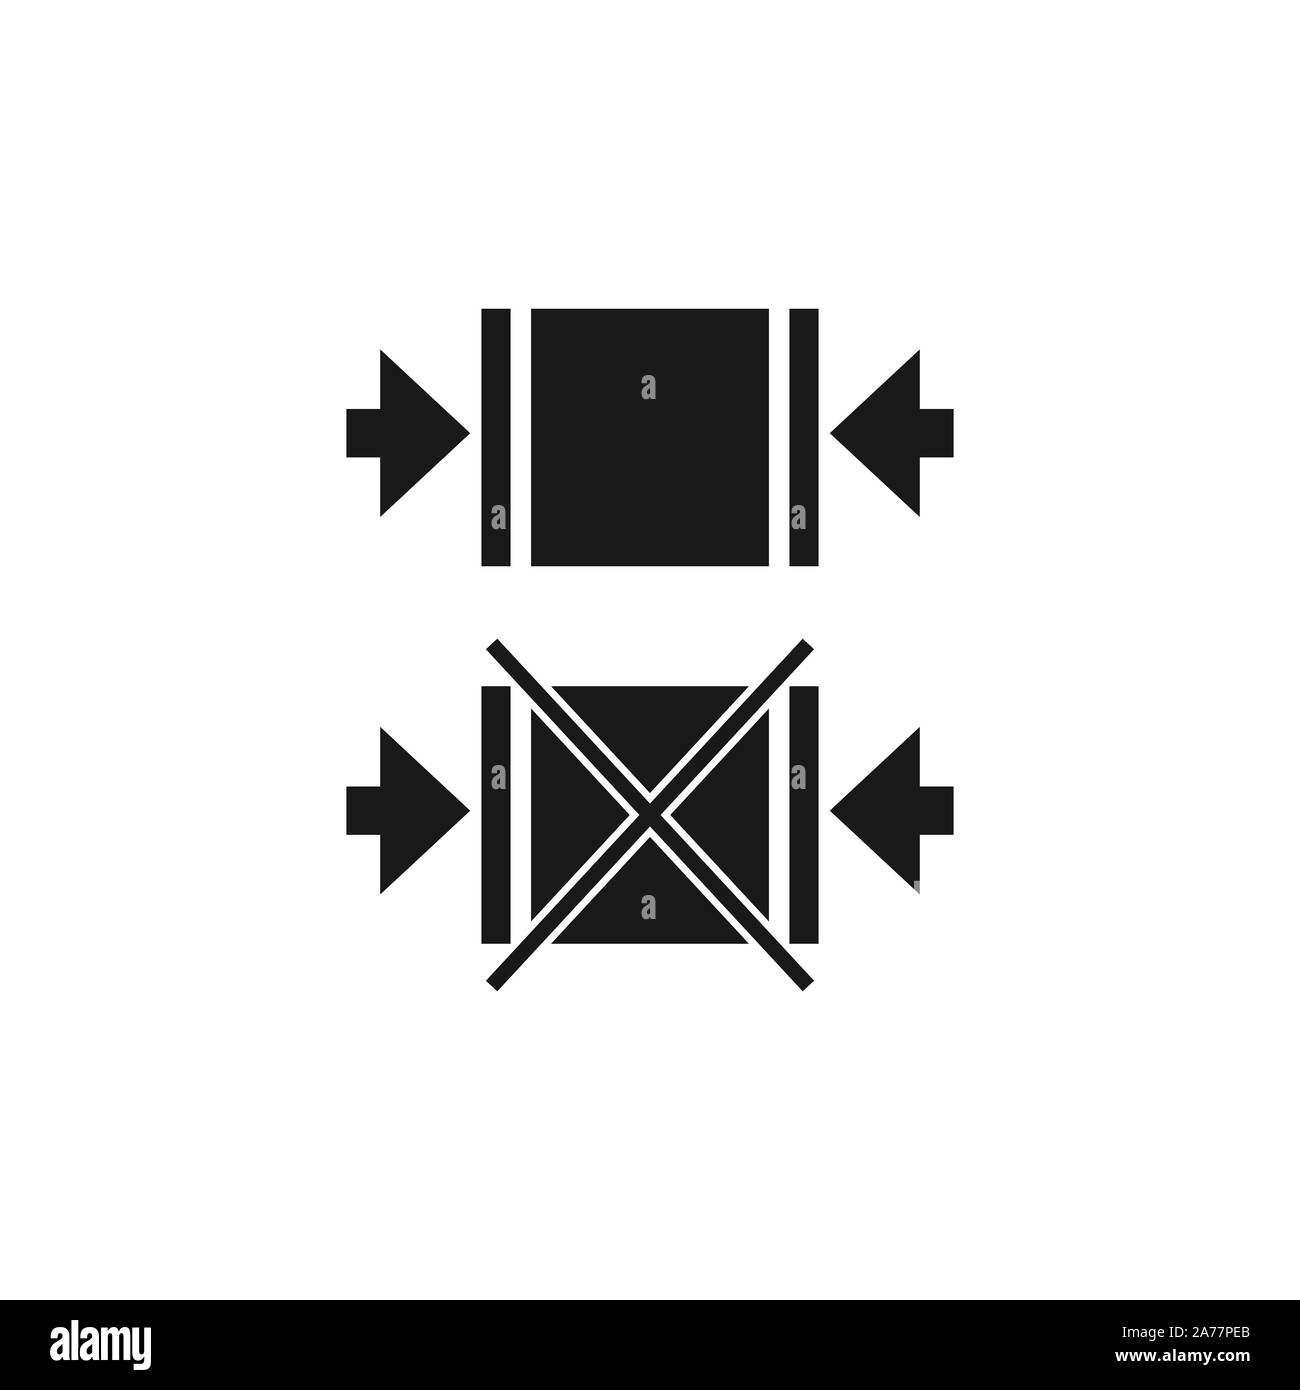 Clamp as indicated. Vector illustration, flat design. Stock Vector